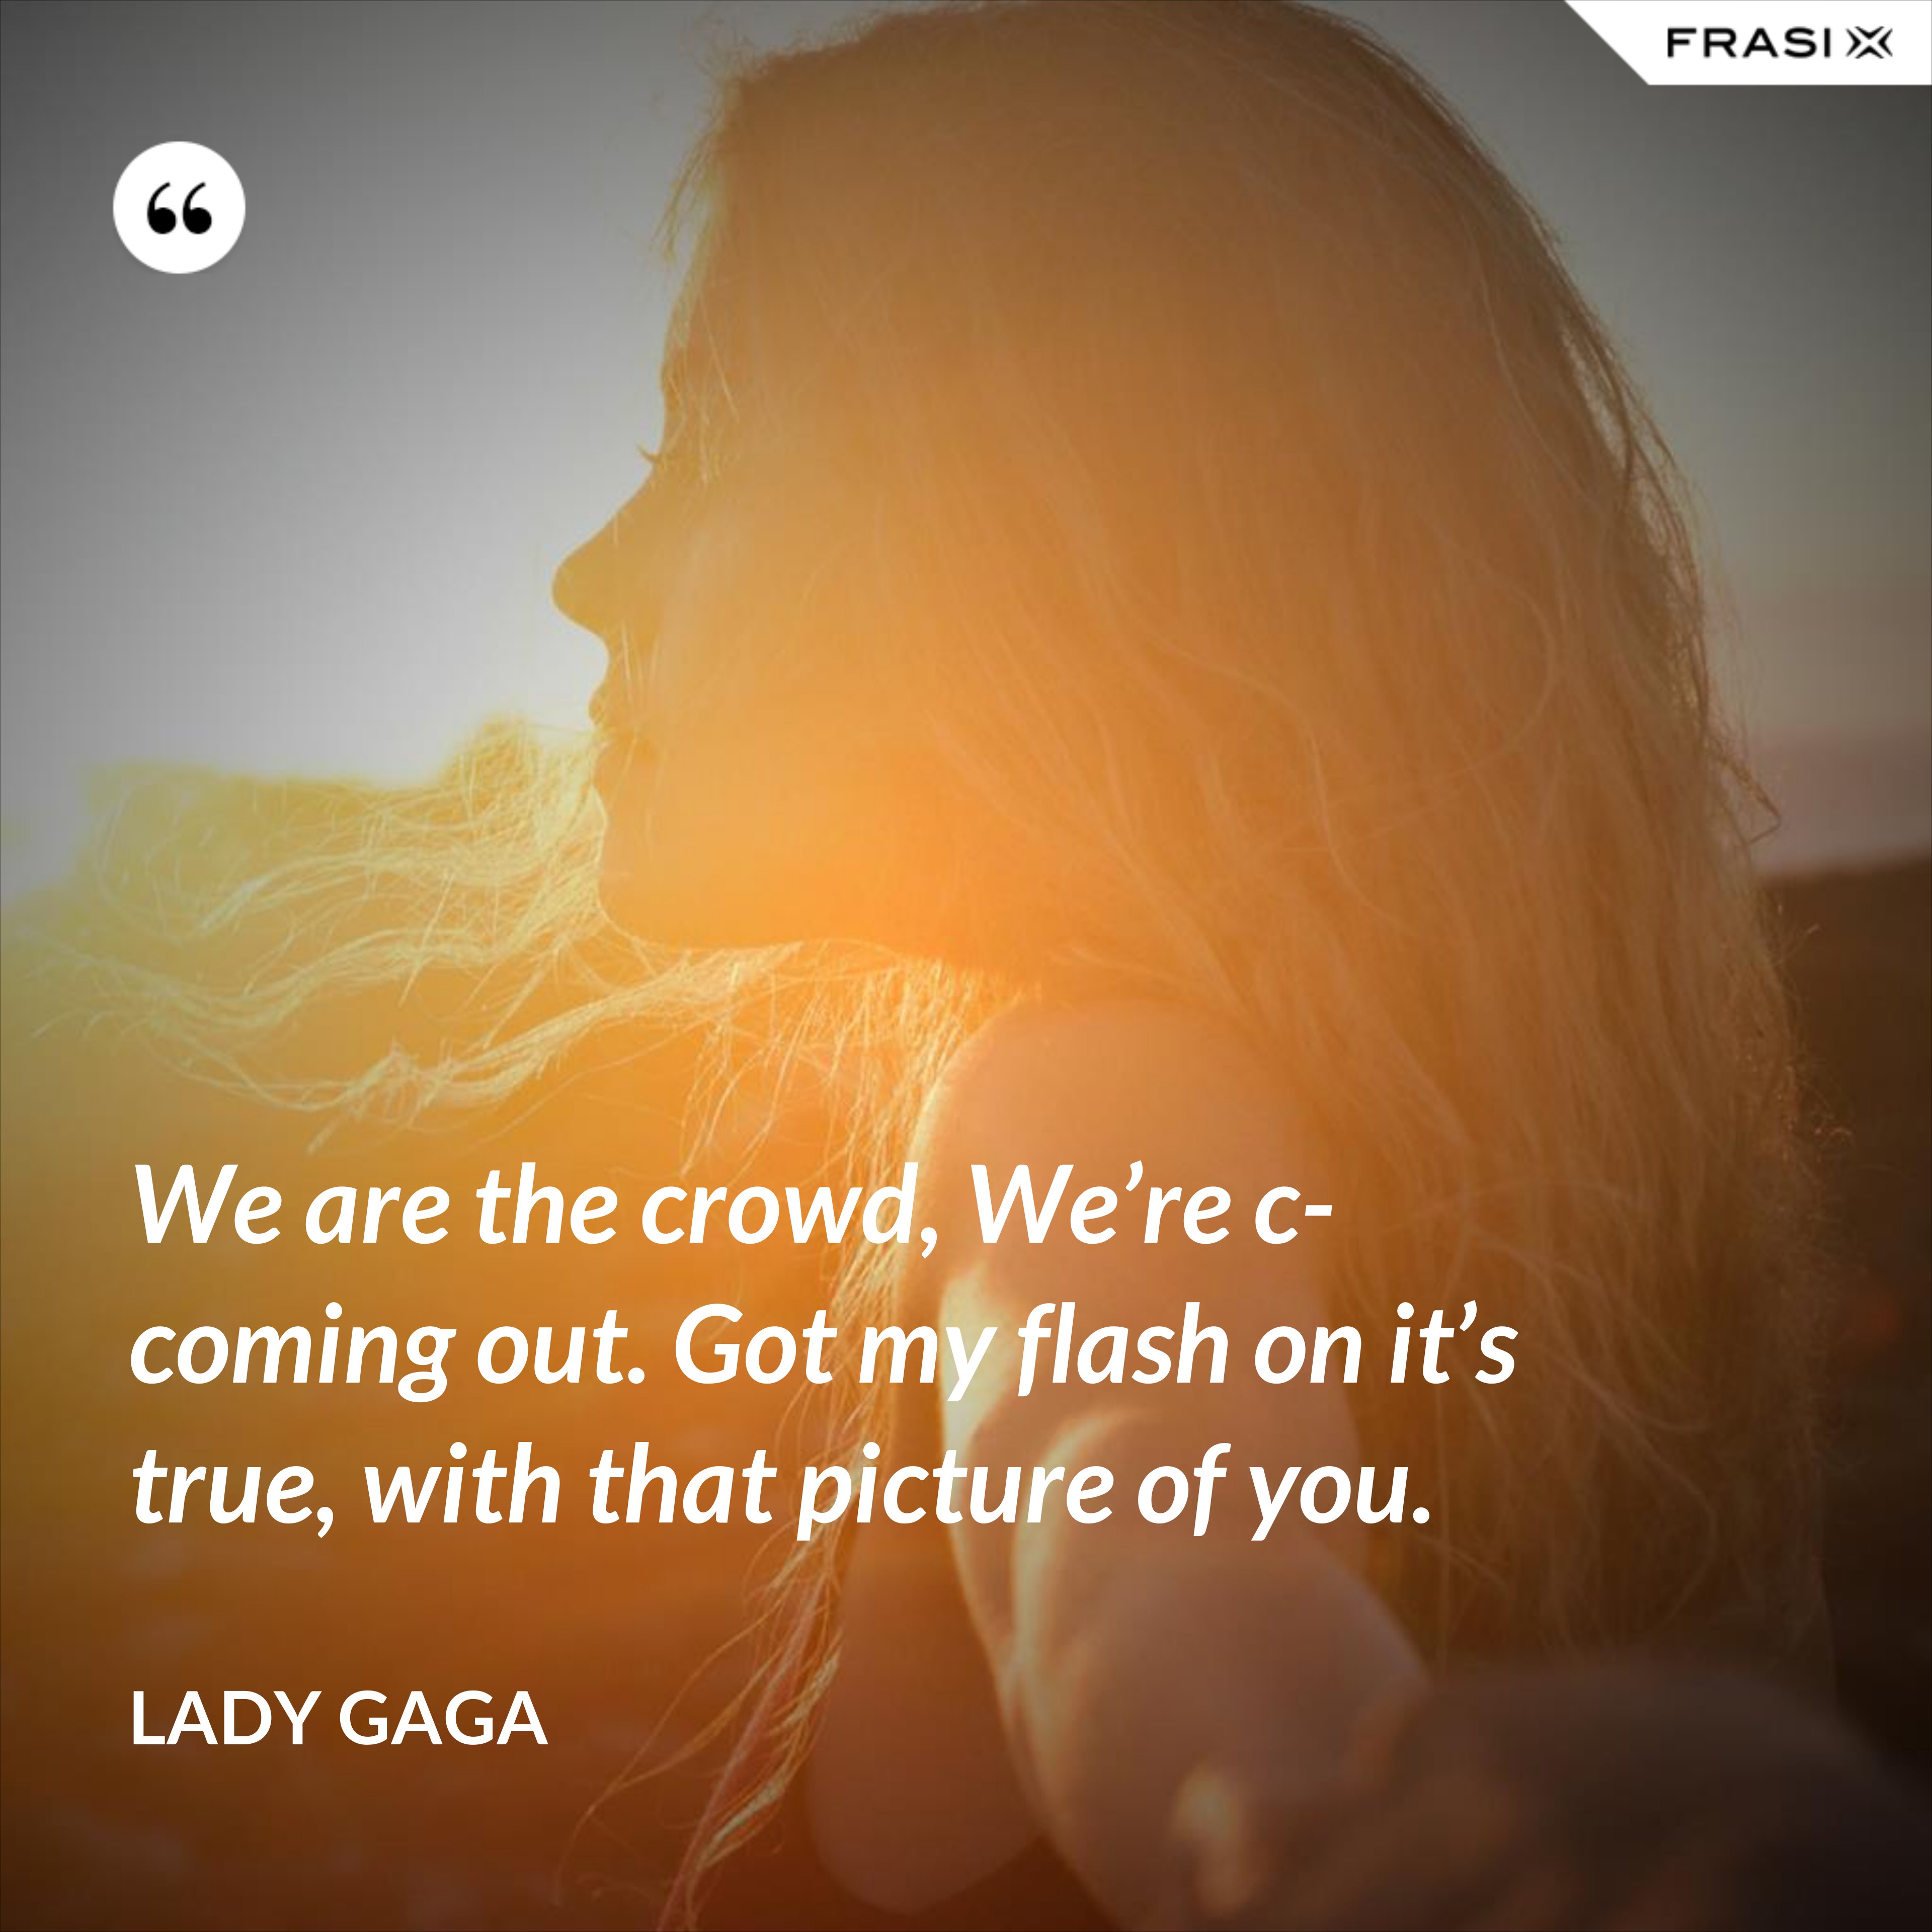 We are the crowd, We’re c-coming out. Got my flash on it’s true, with that picture of you. - Lady Gaga